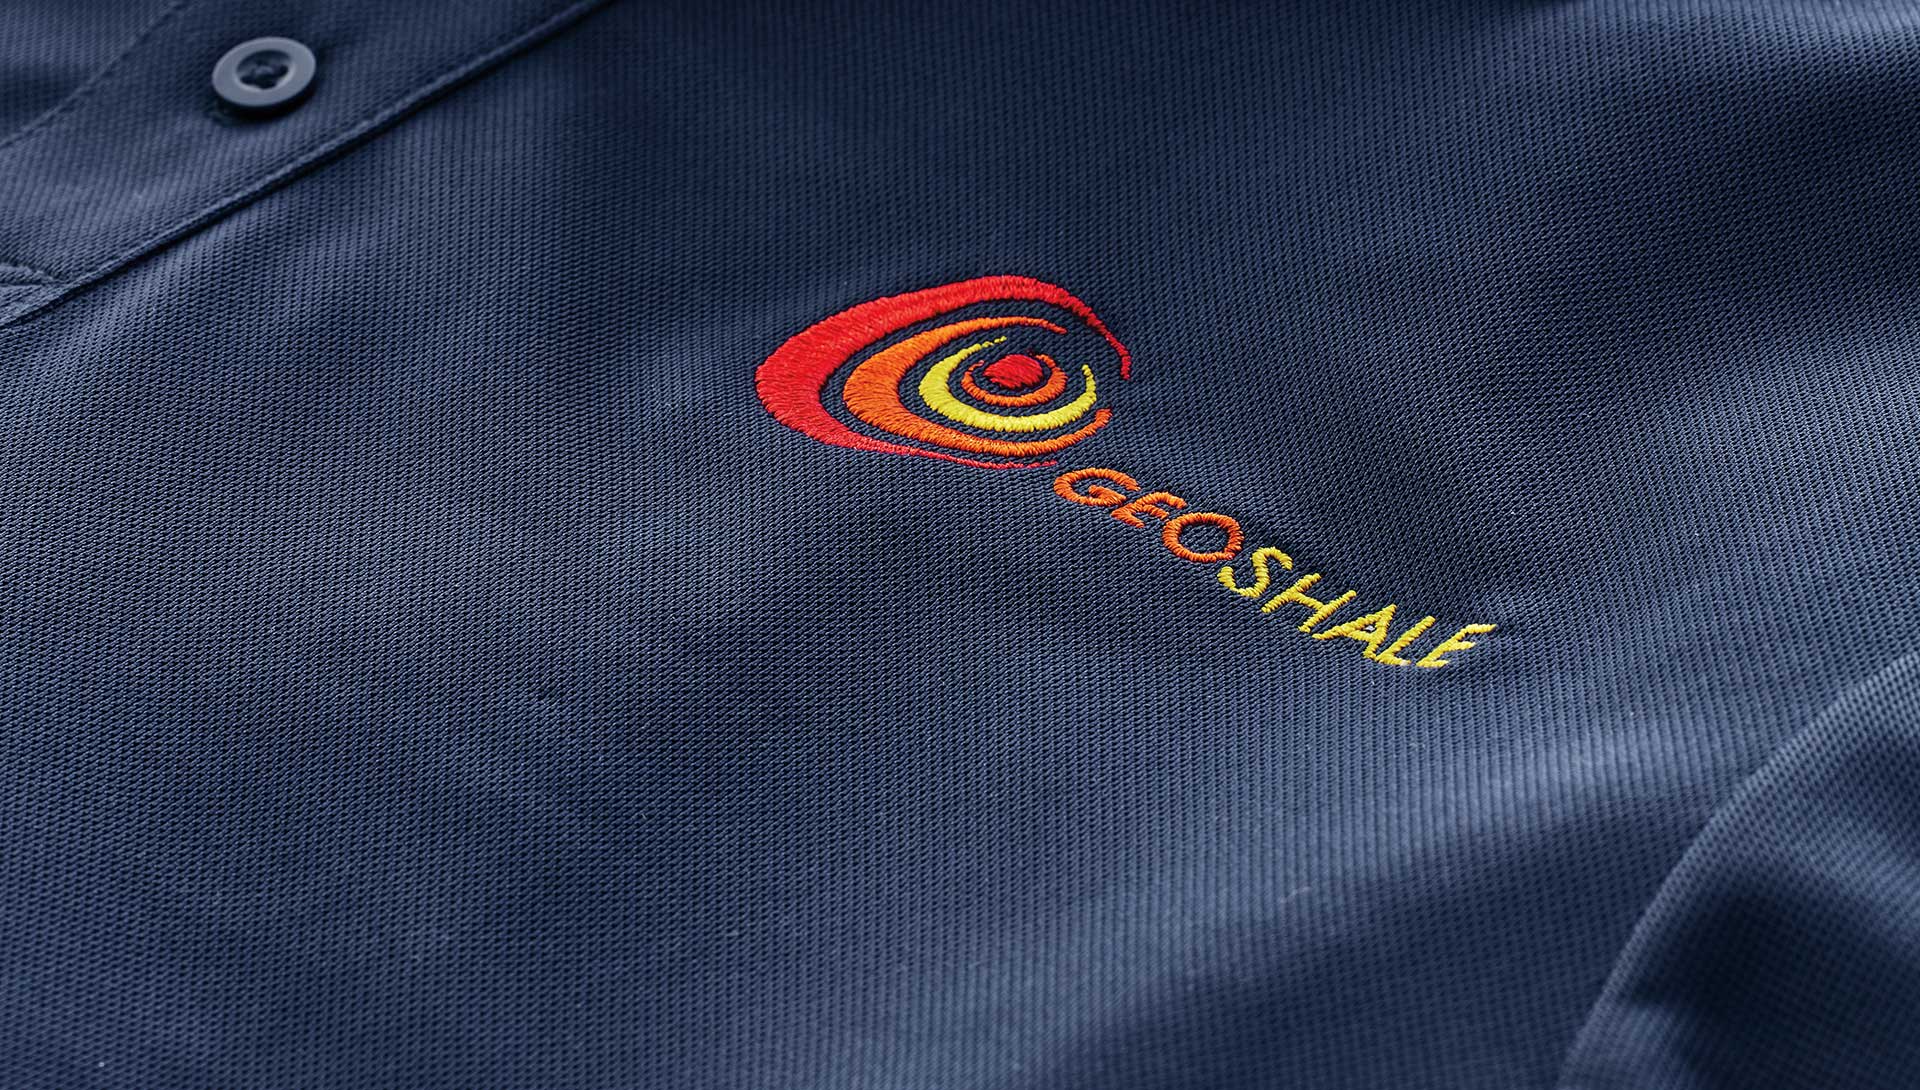 aramark apparel with embroidered logo